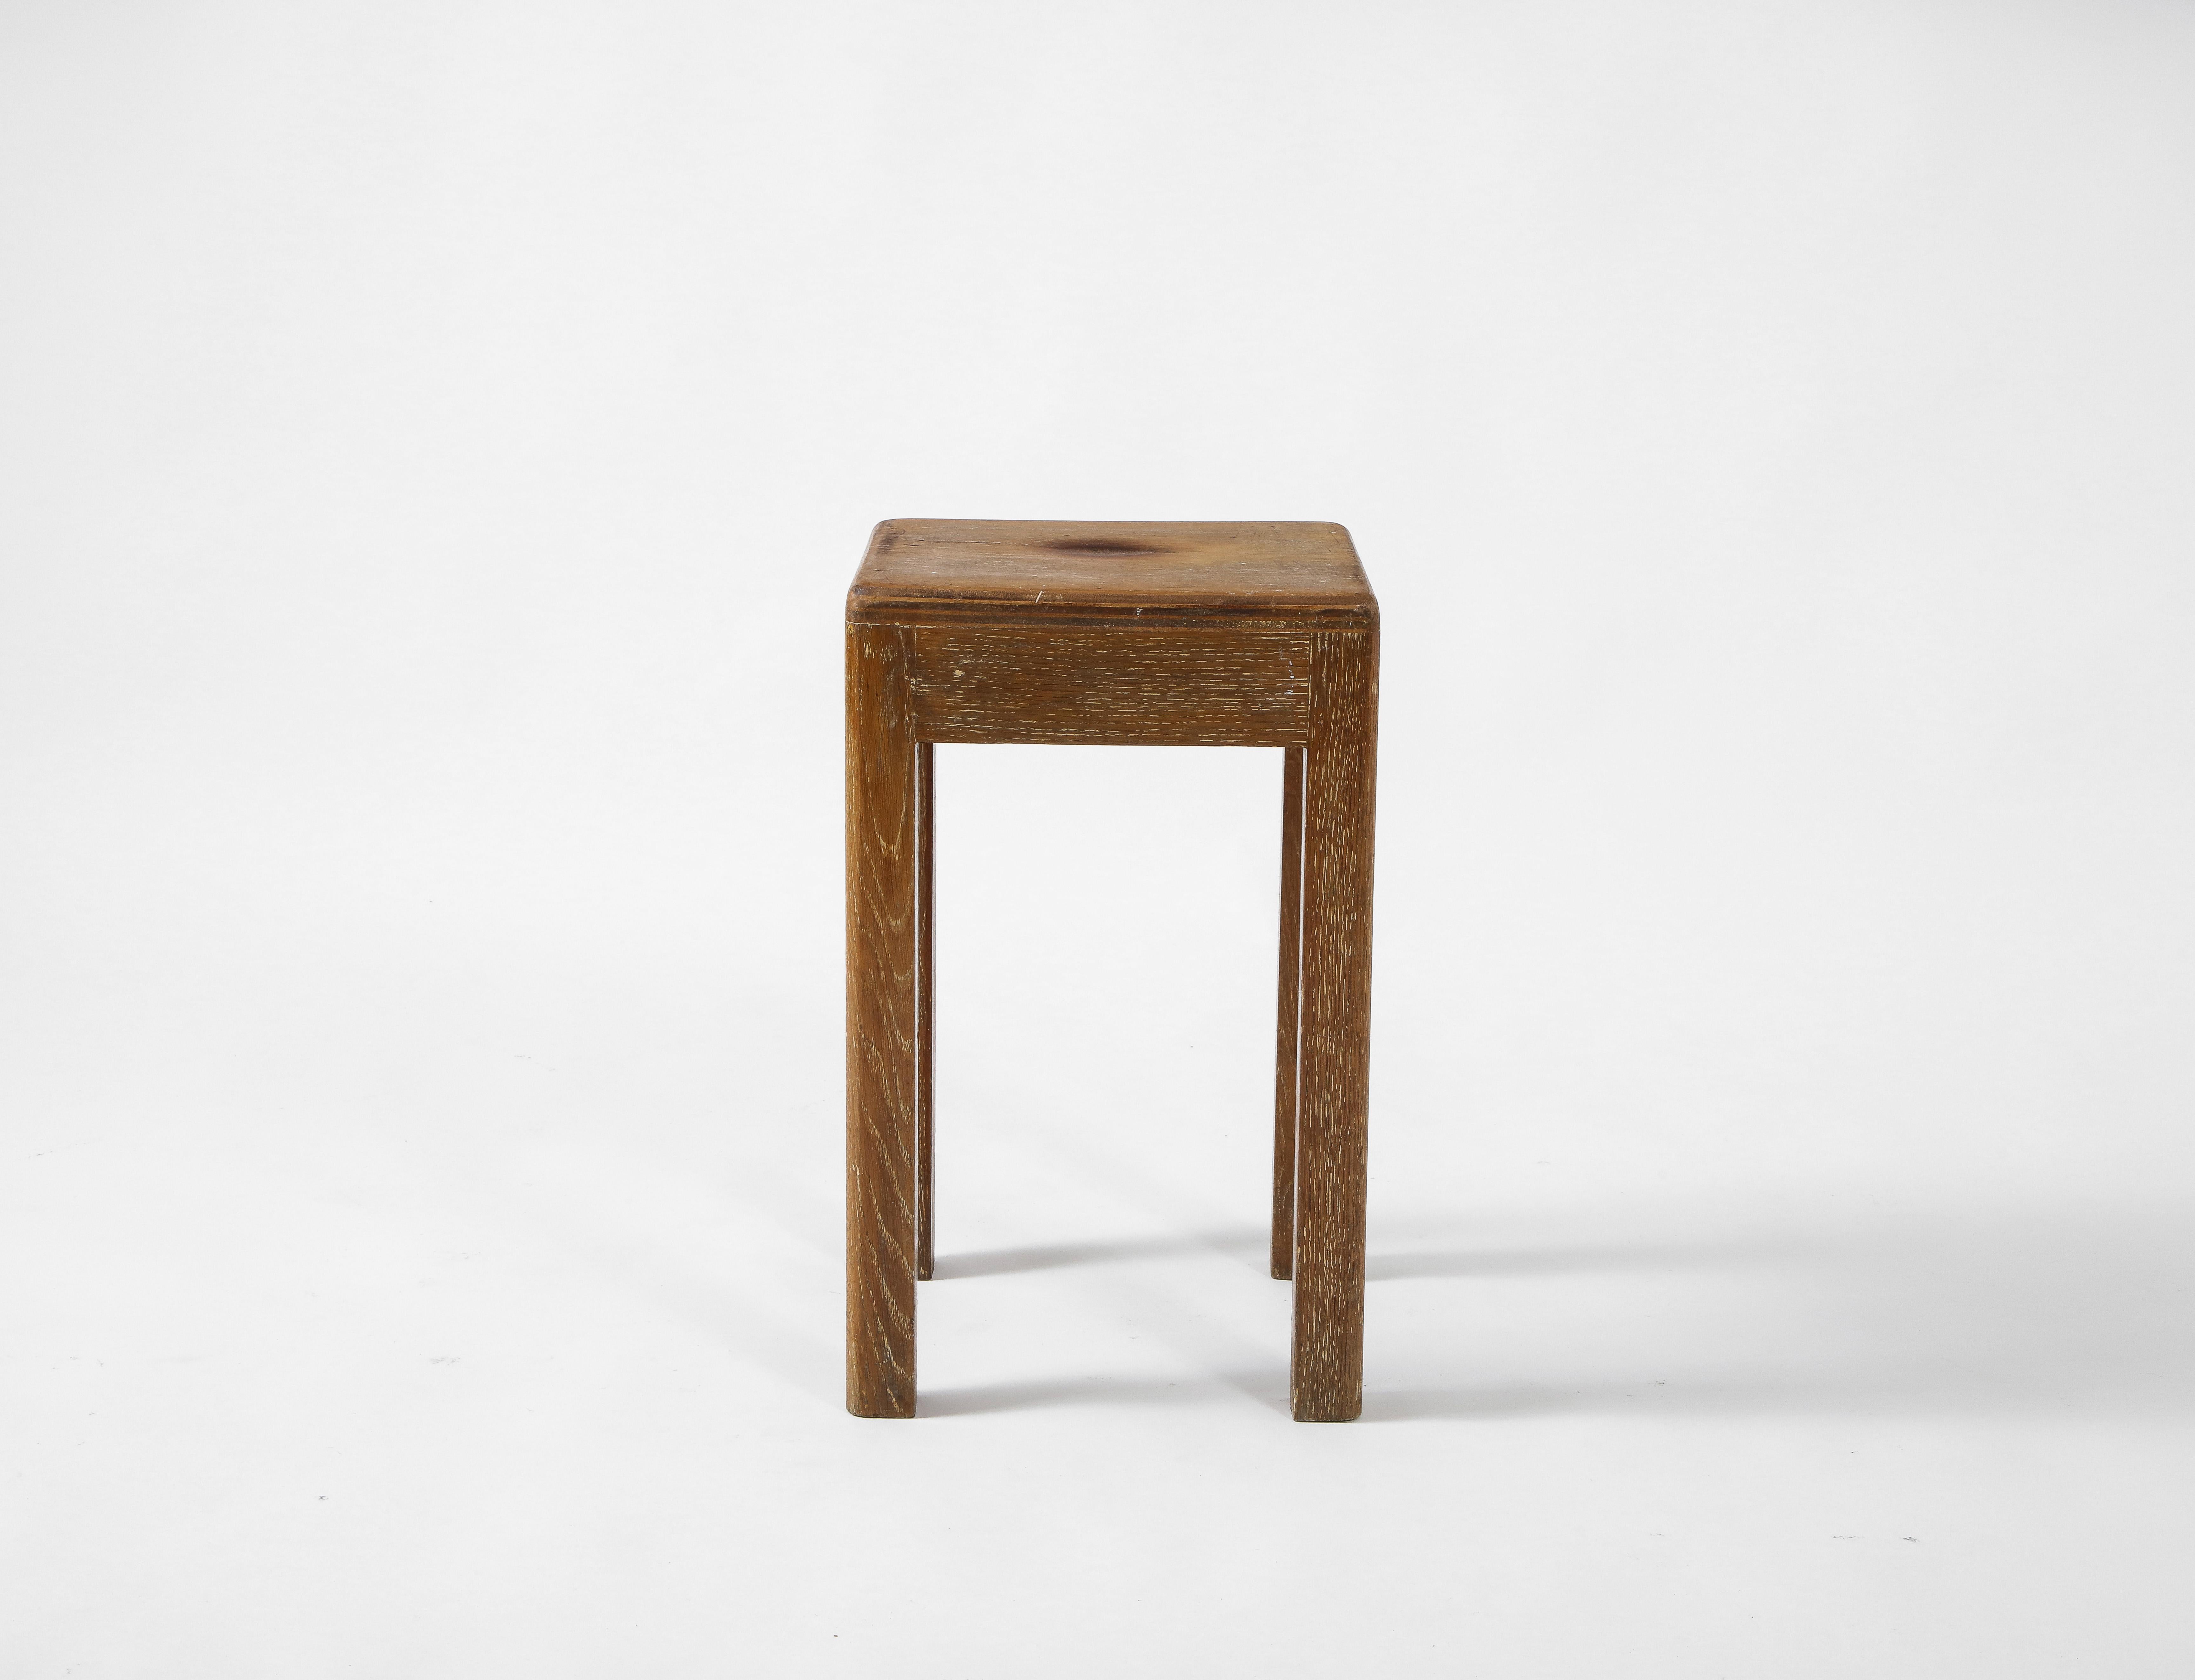 This petite midcentury French oak piece has an impeccably placed wooden knot in the center. It sits upon four thin legs that have earned a soft patina over time. Could function either as a stool or small side table. Notable discoloration at the